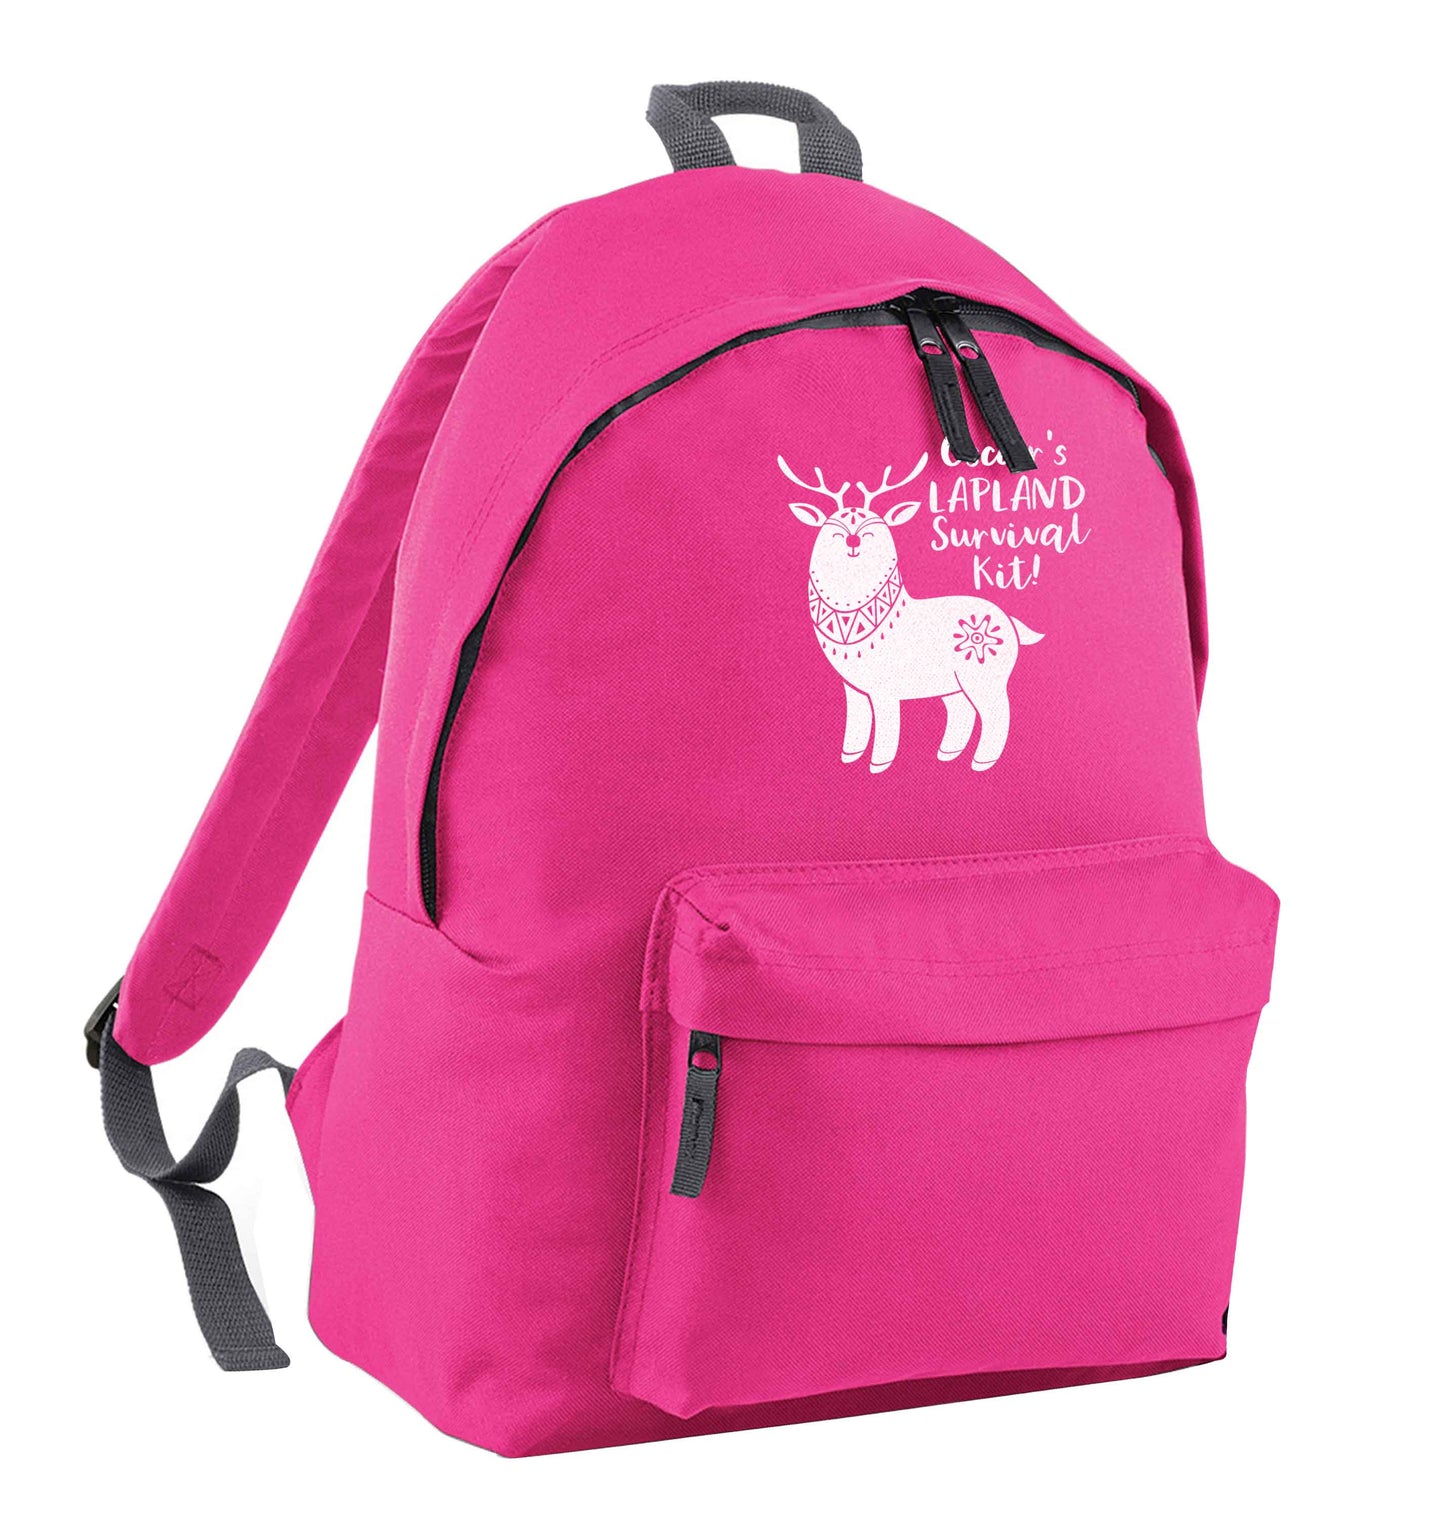 Personalised Lapland Survival Kit pink children's backpack